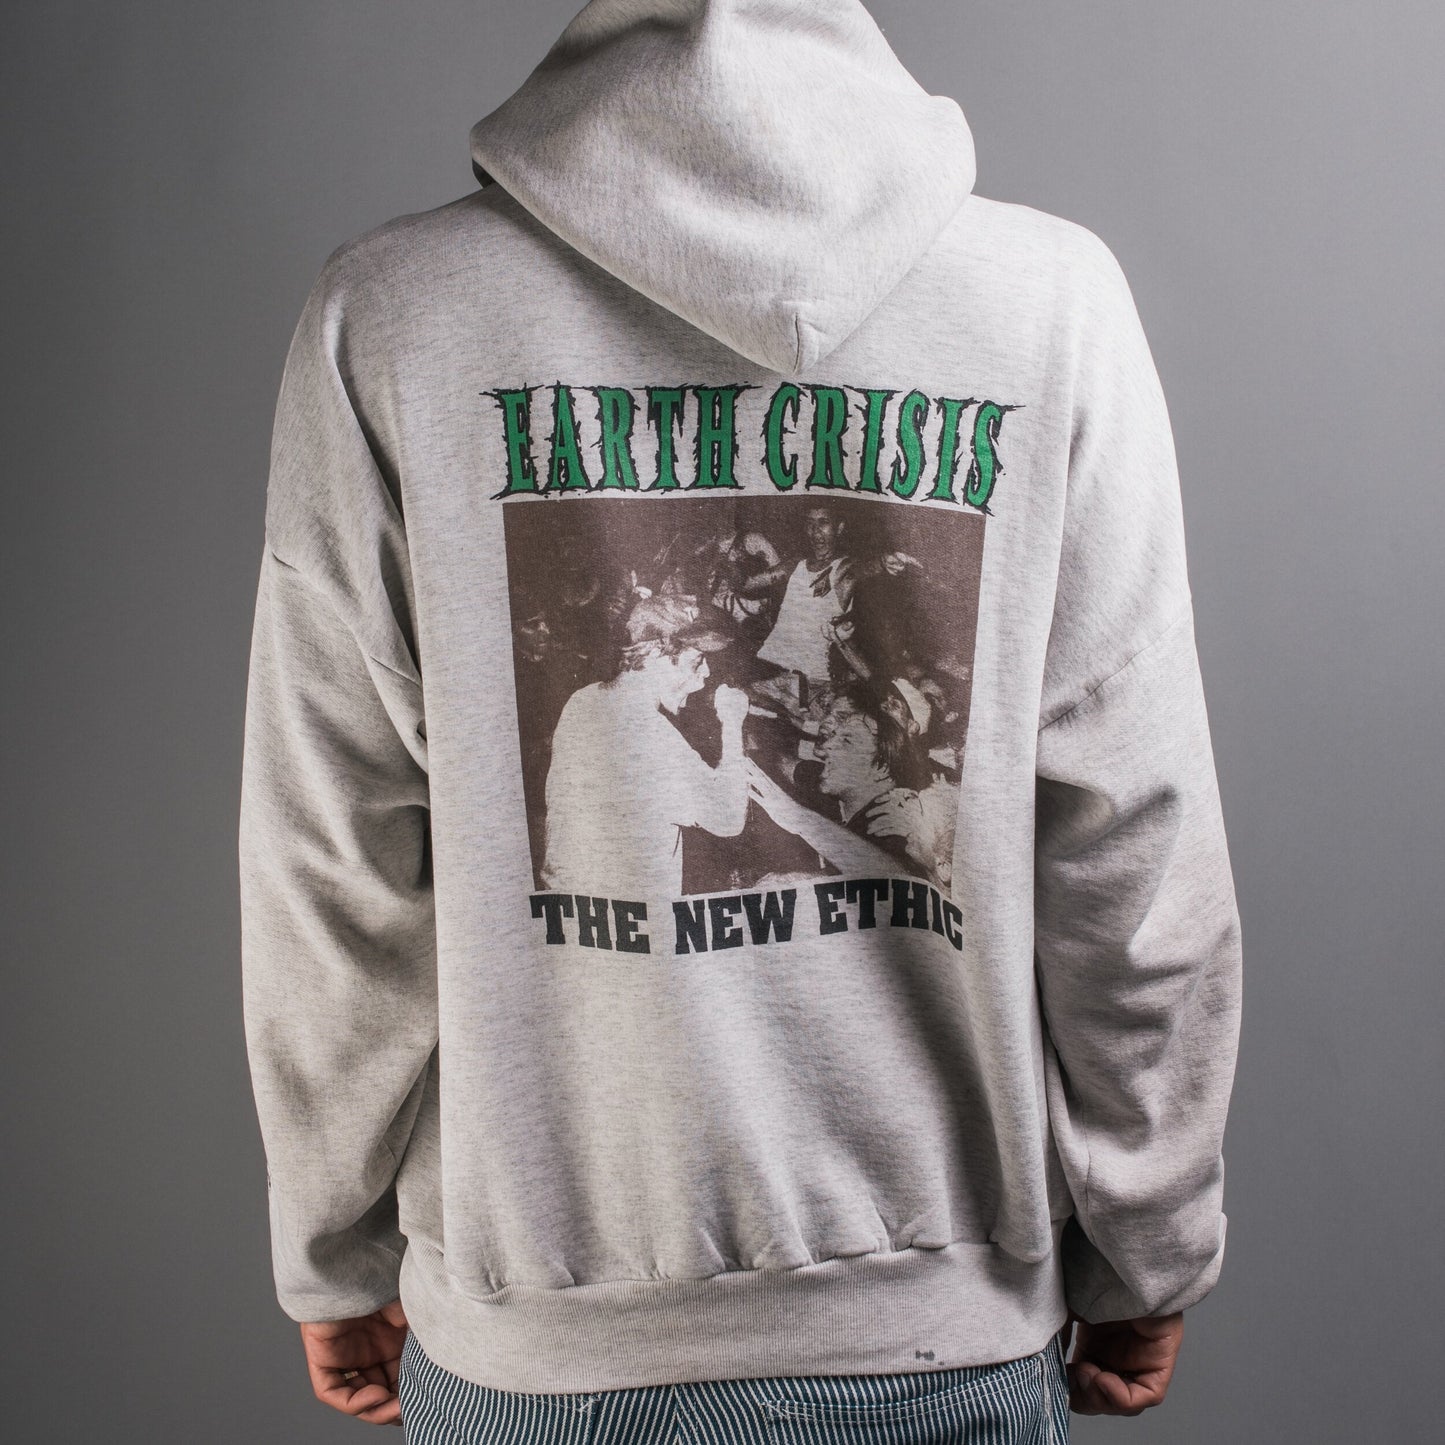 Vintage 90’s Earth Crisis The New Ethic Hoodie